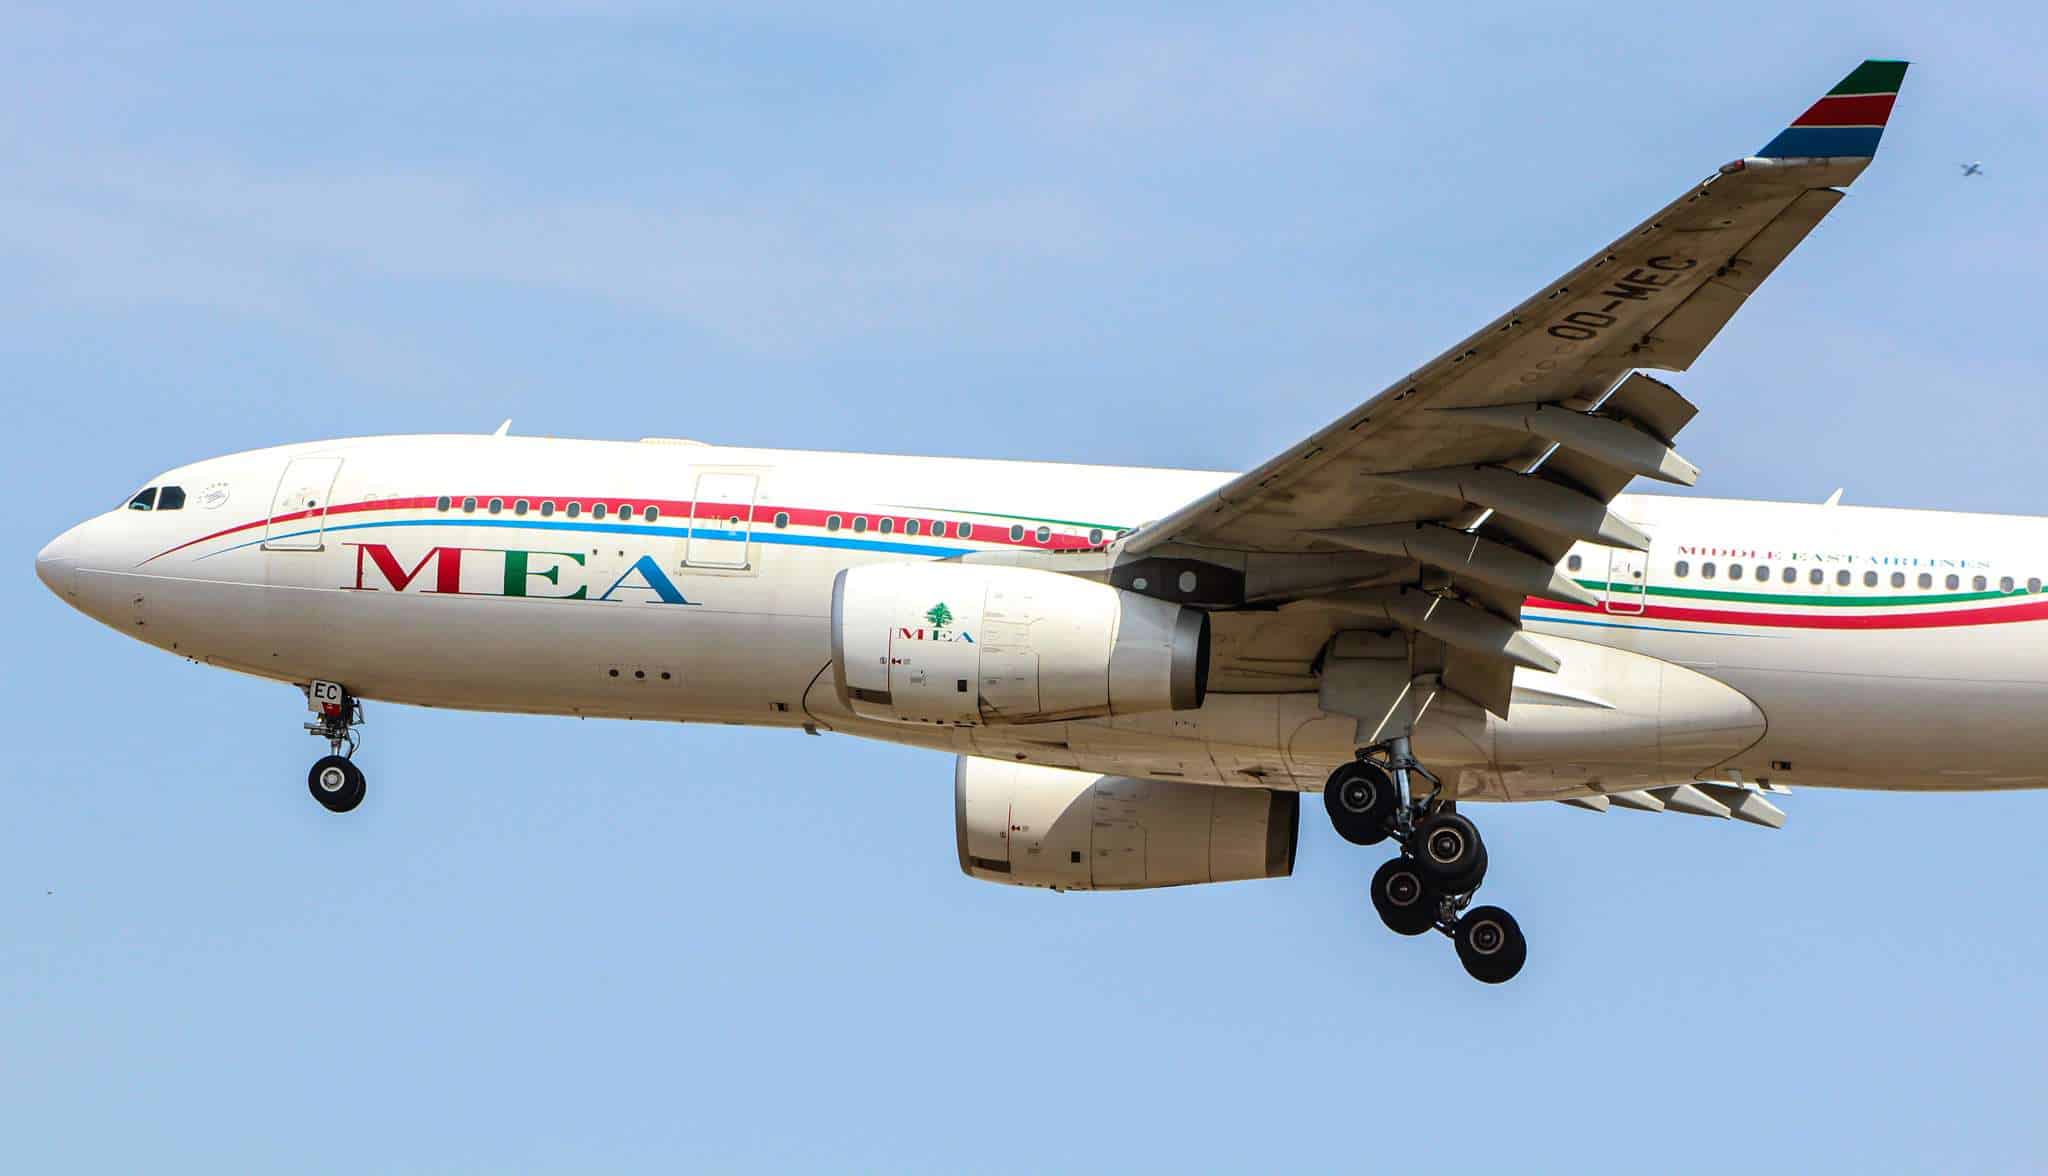 Middle East Airlines (MEA) has evacuated aircraft from Beirut, Lebanon and have sent them to Istanbul as a security precaution caused by the ongoing conflict in Israel.